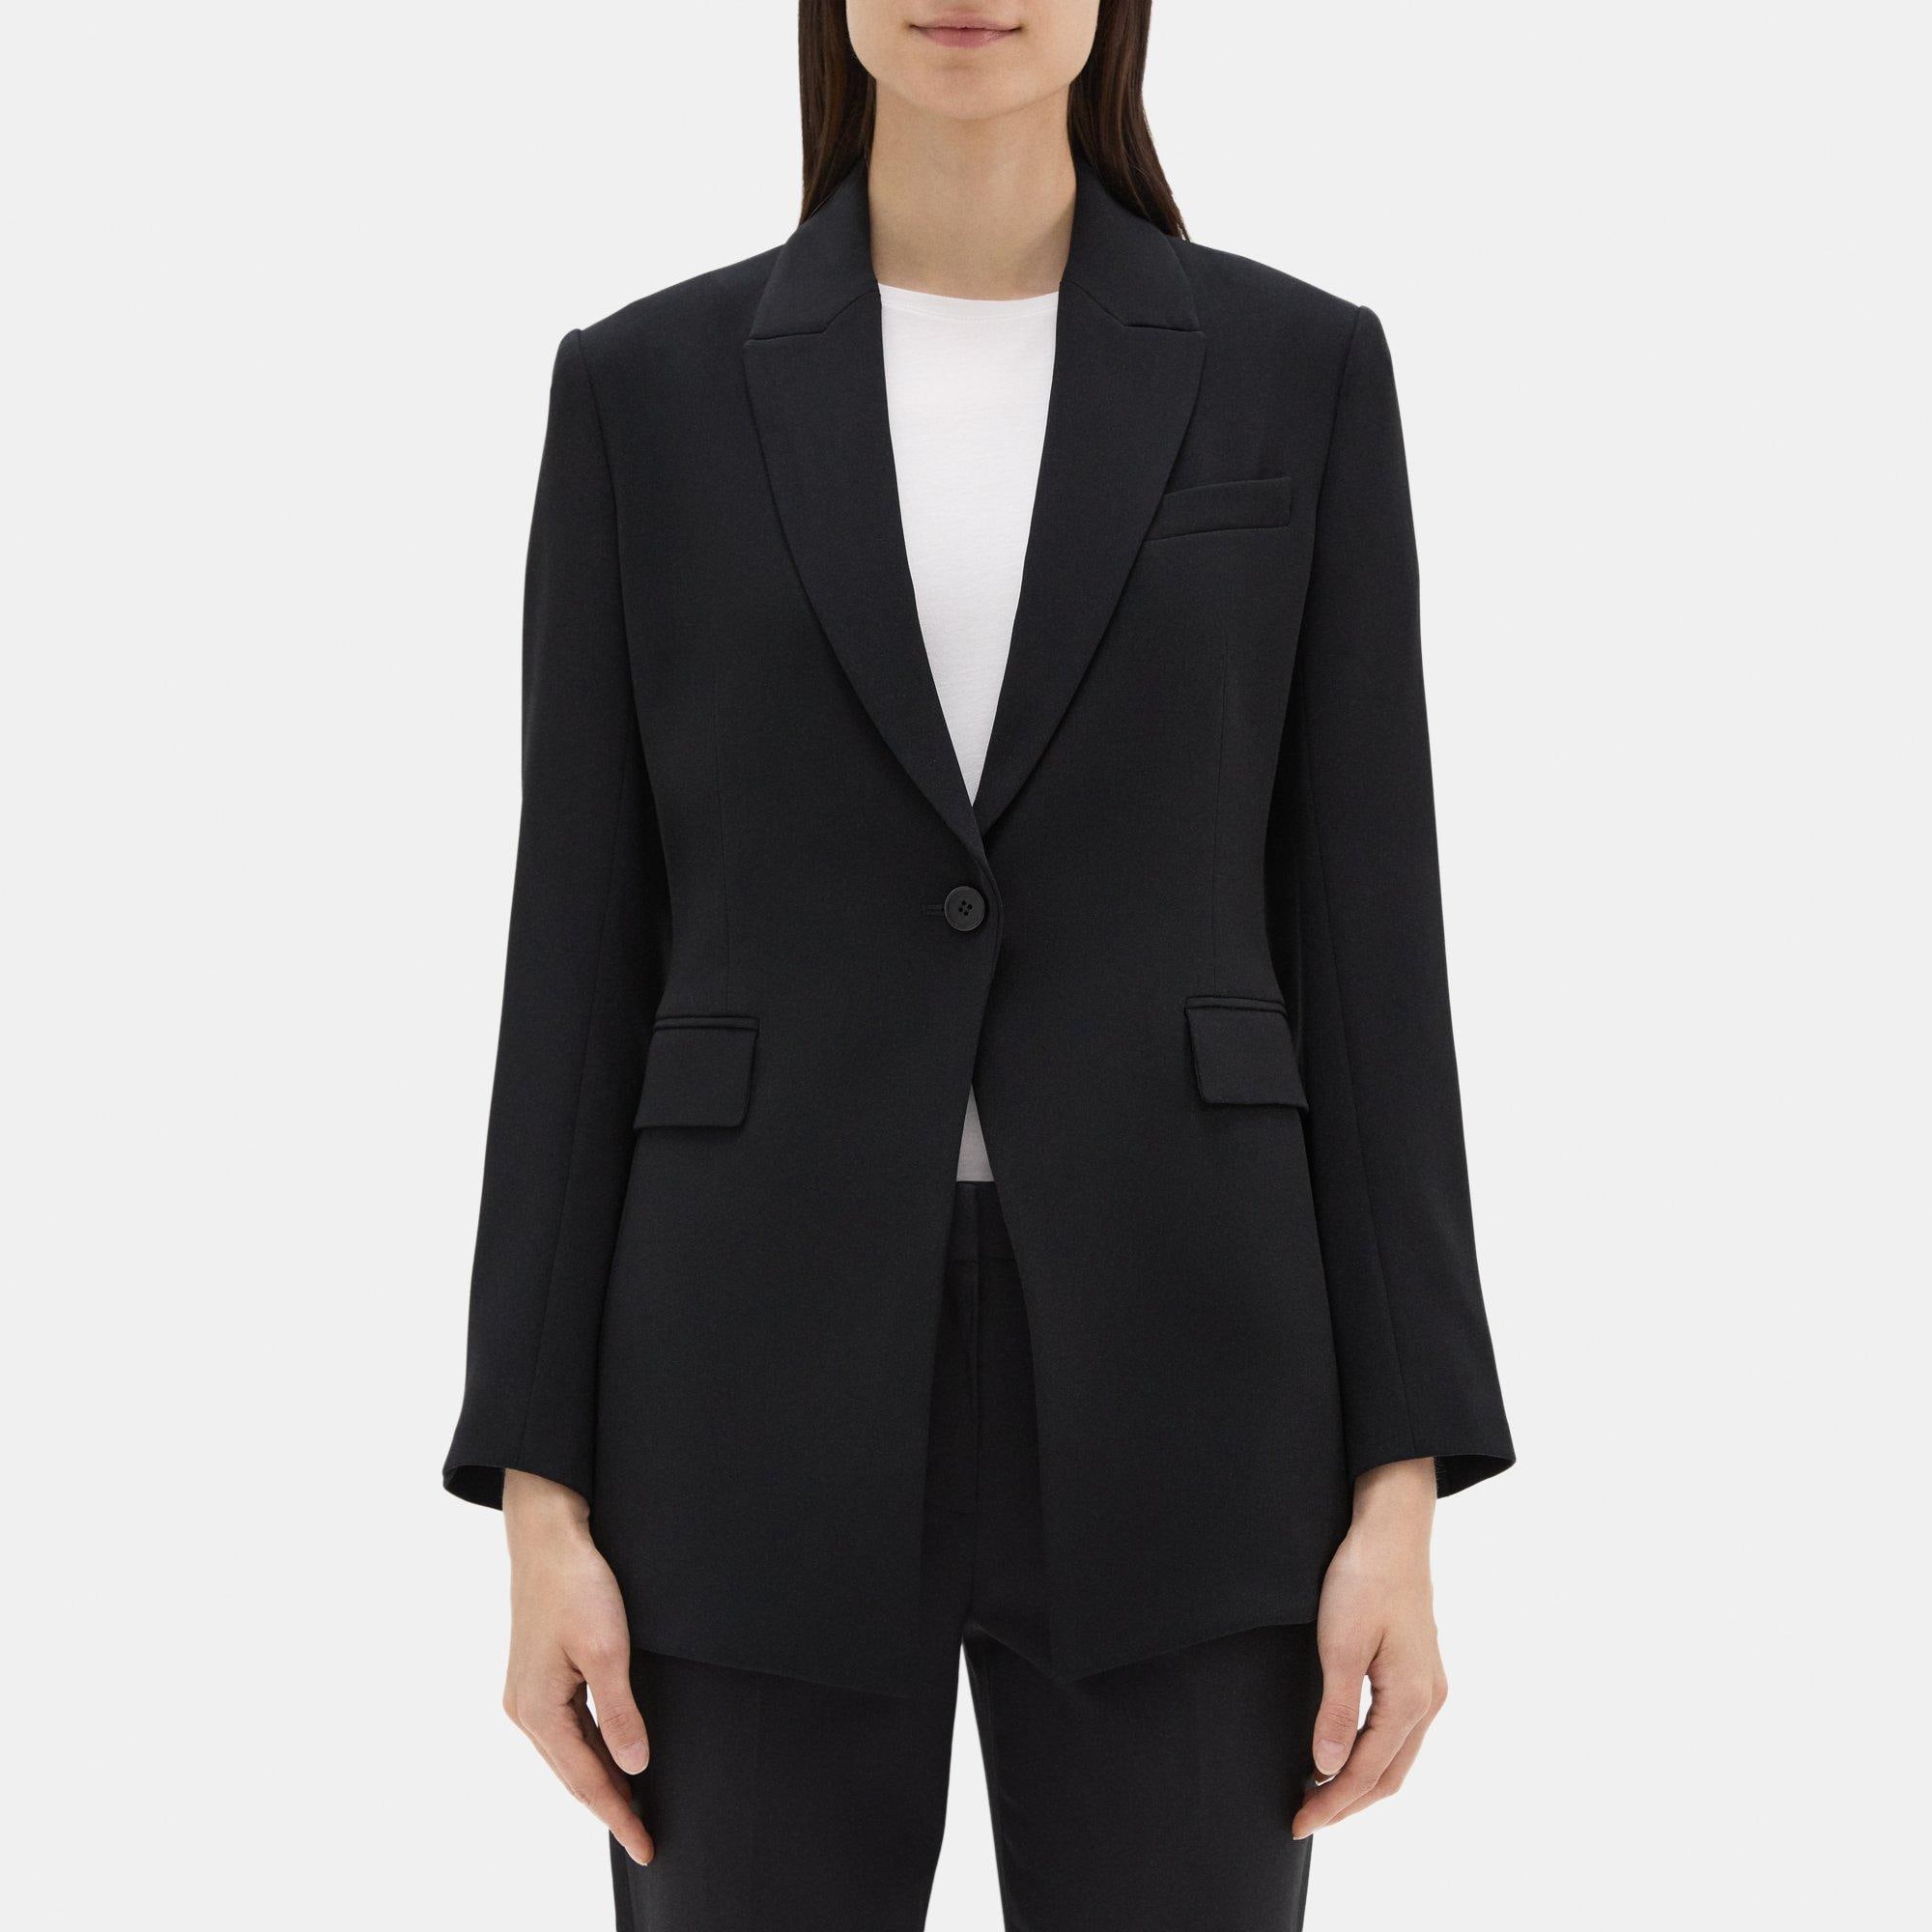 Theory Single-Breasted Blazer in Crepe